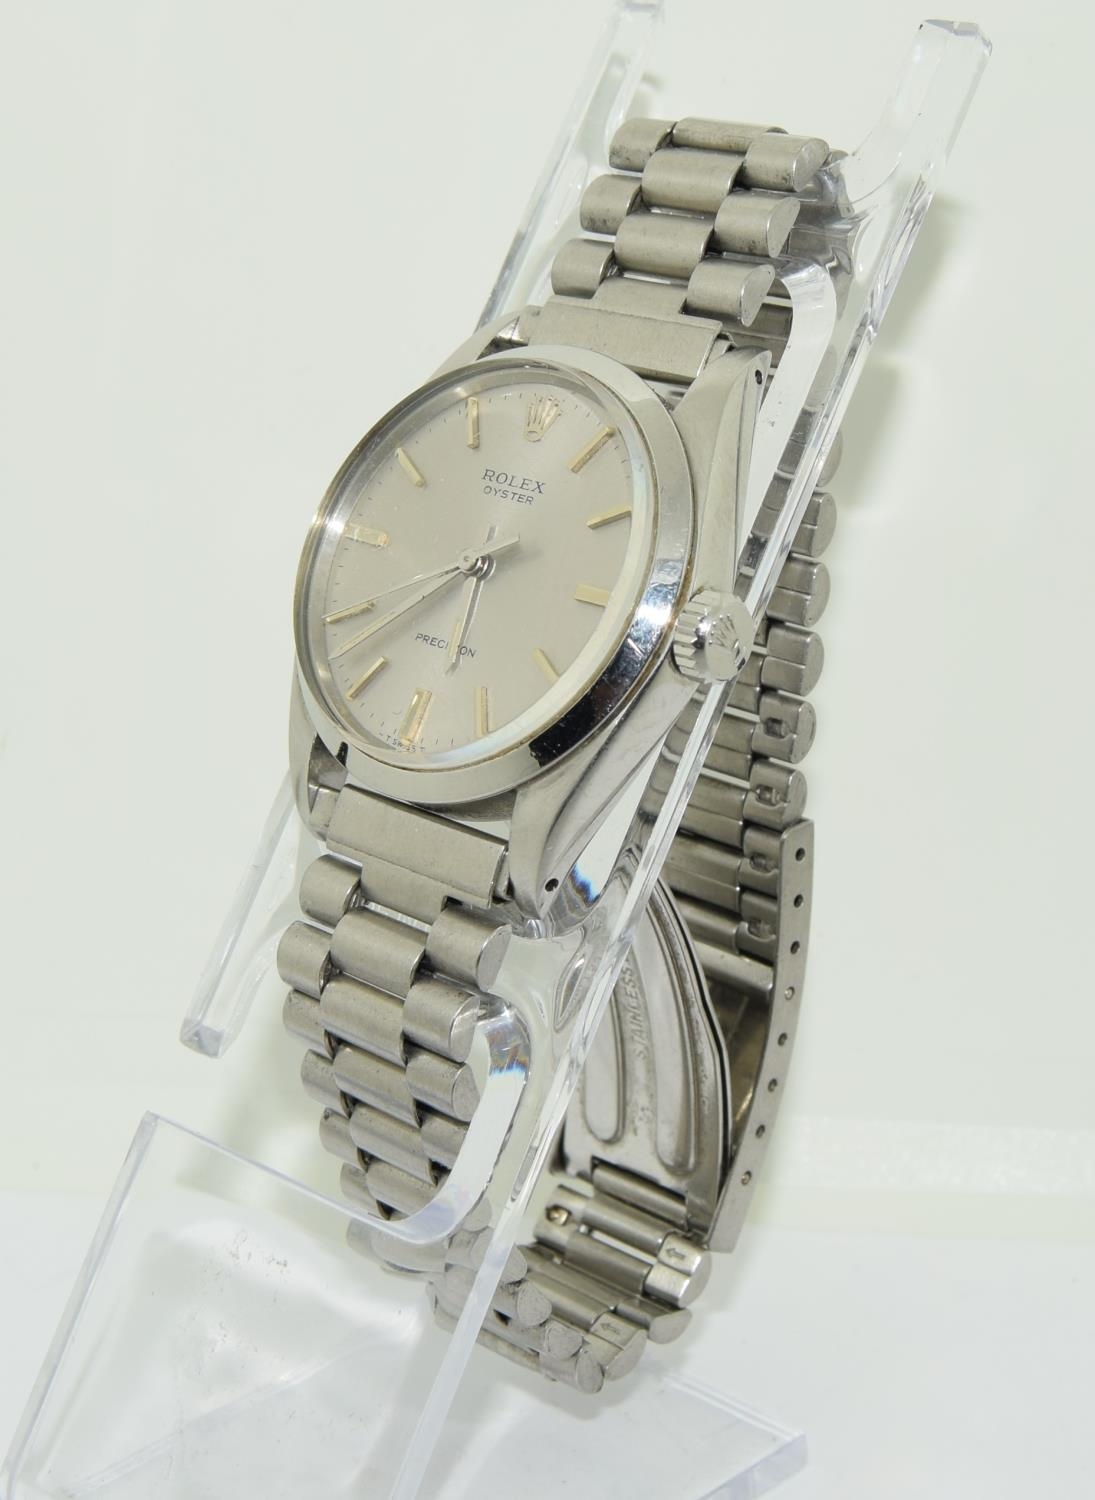 Rolex "Oyster gents stainless steel wristwatch year 1973 model 6426, movement 1225 serial no 349**** - Image 3 of 9